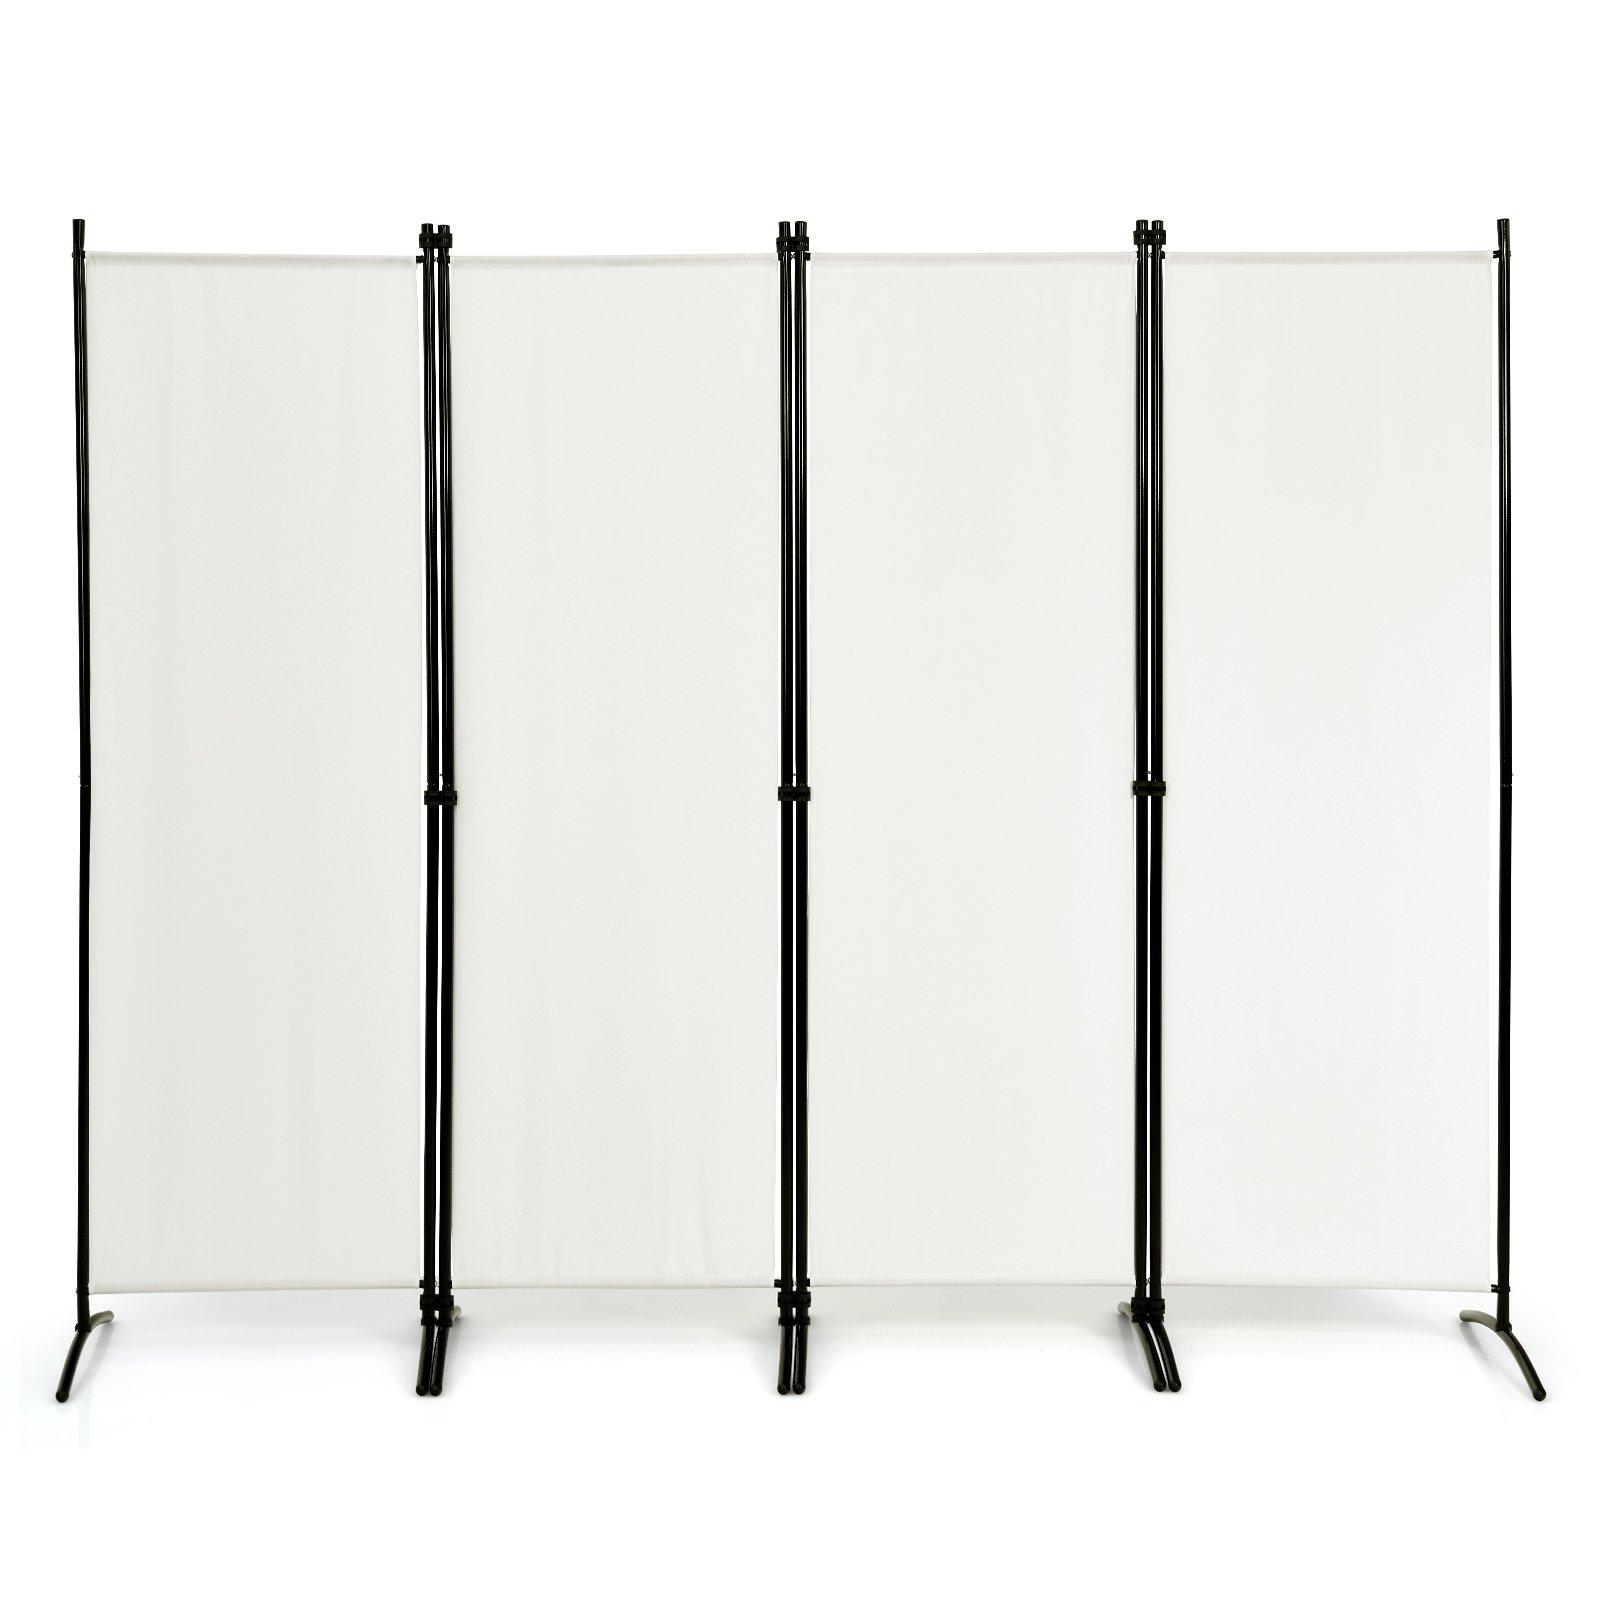 Folding Room Divider 4 Panel Wall Privacy Screen Protector Home Living Room